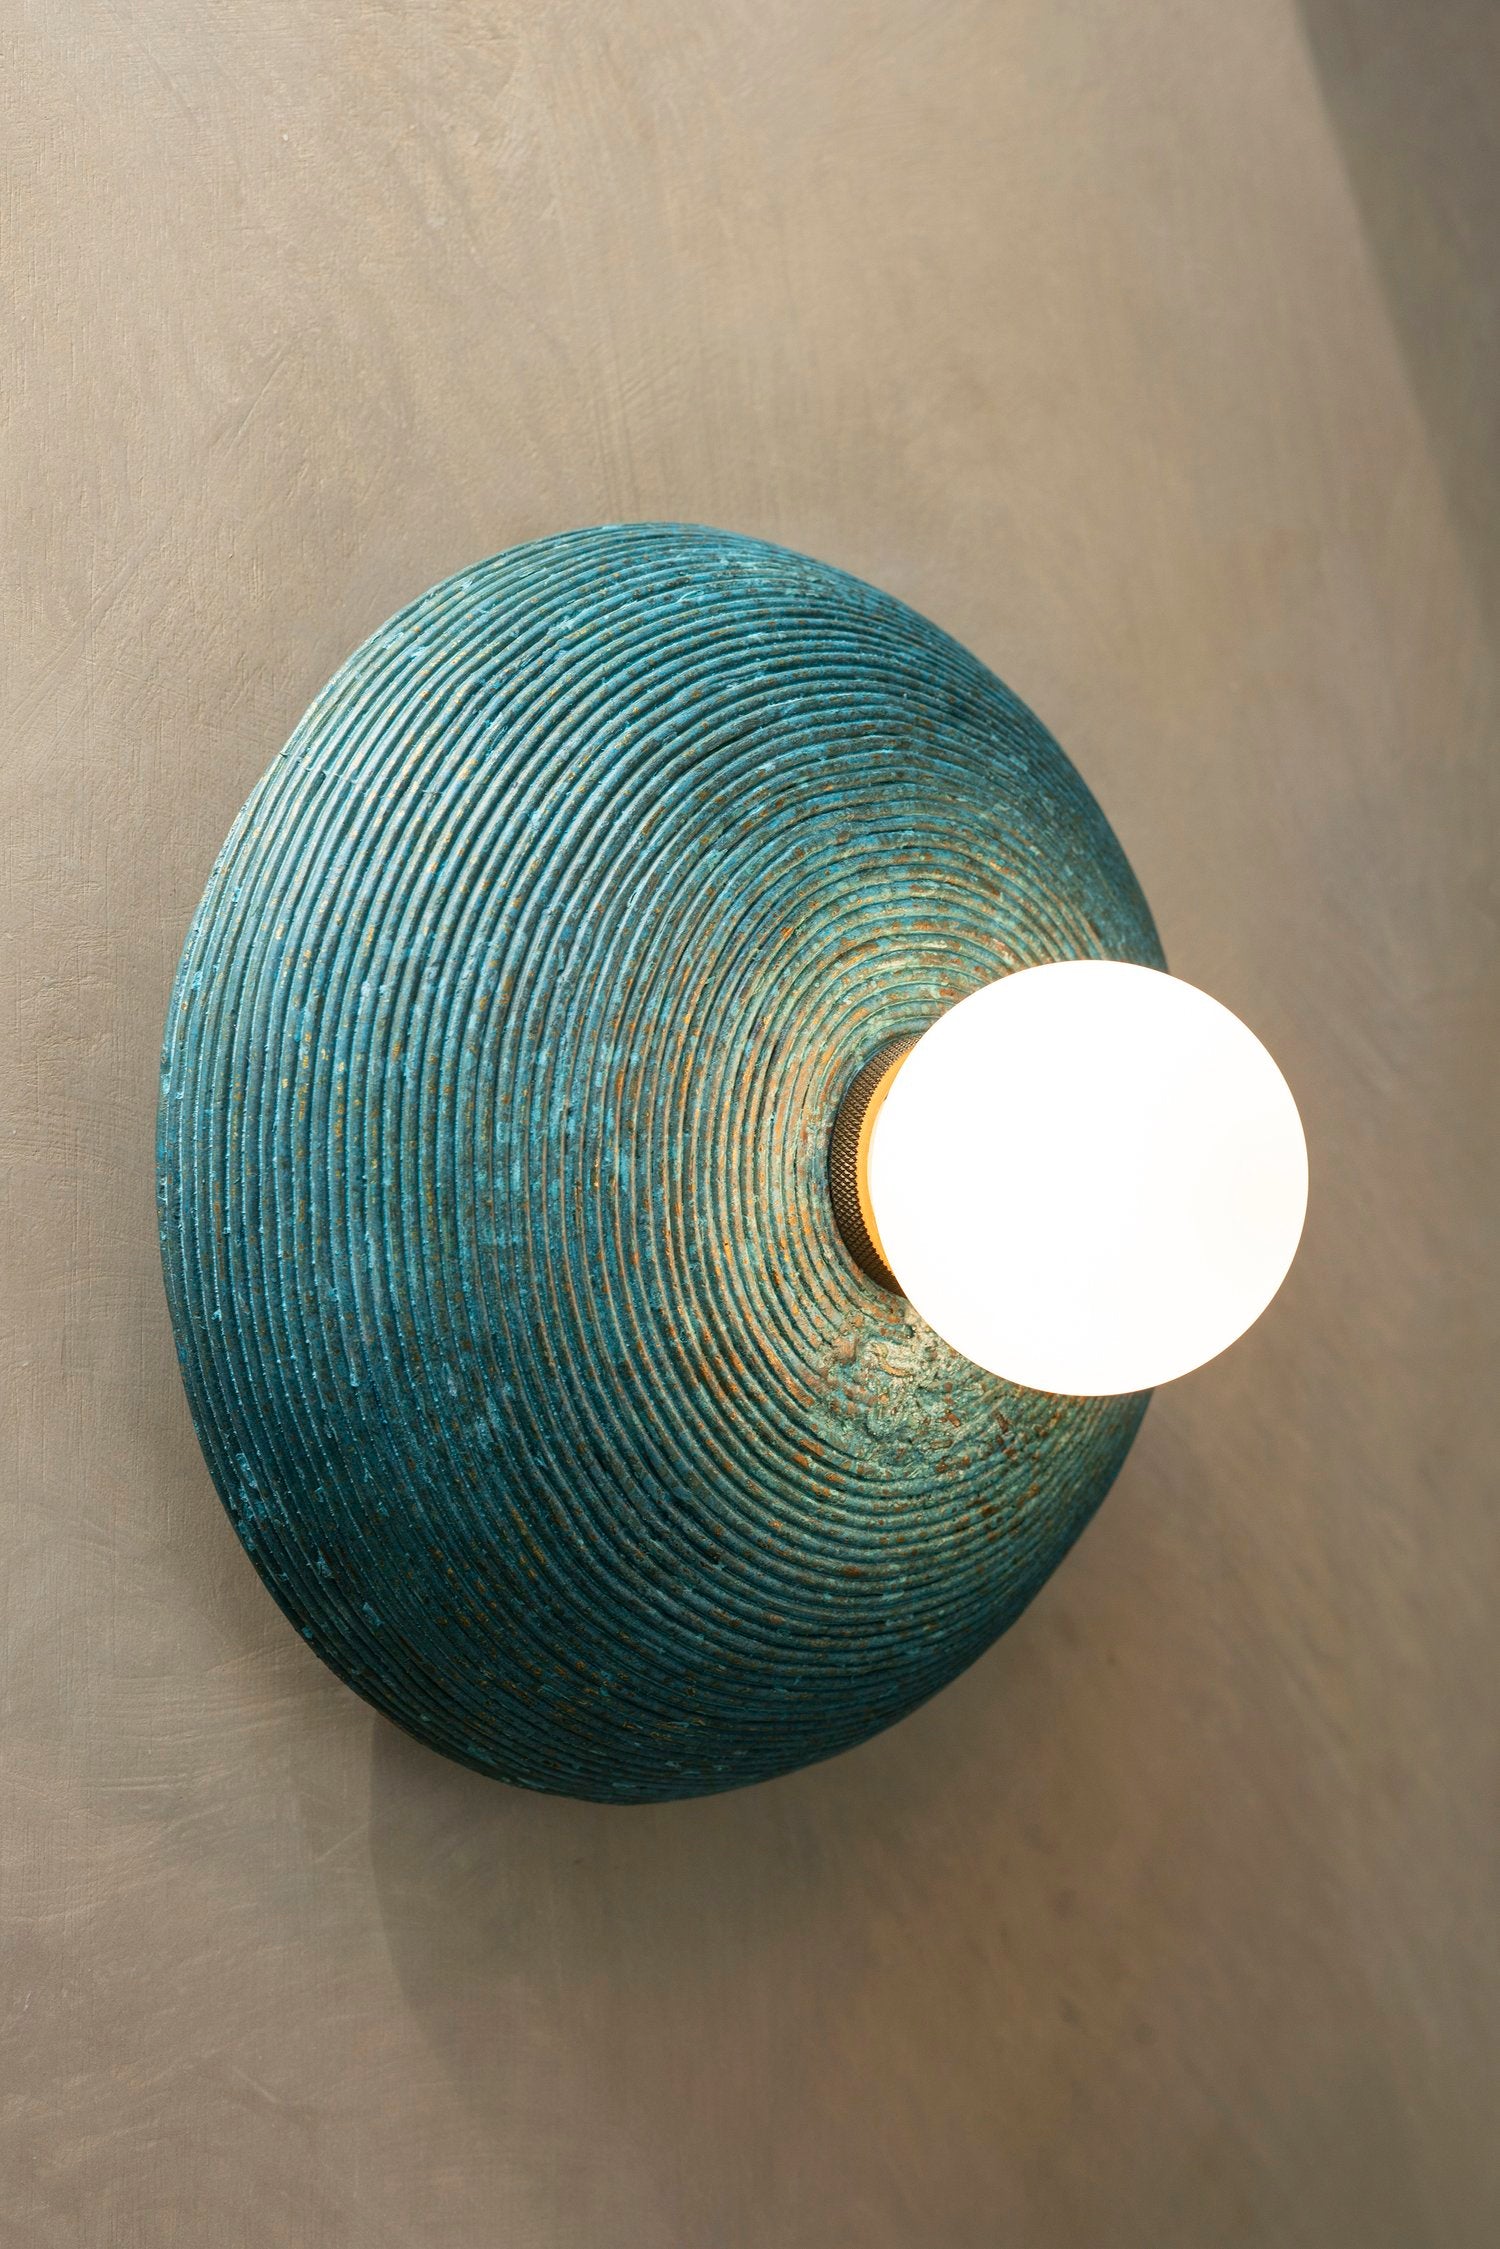 CONVEX SCONCE - COILED RICE HUSK BLUE